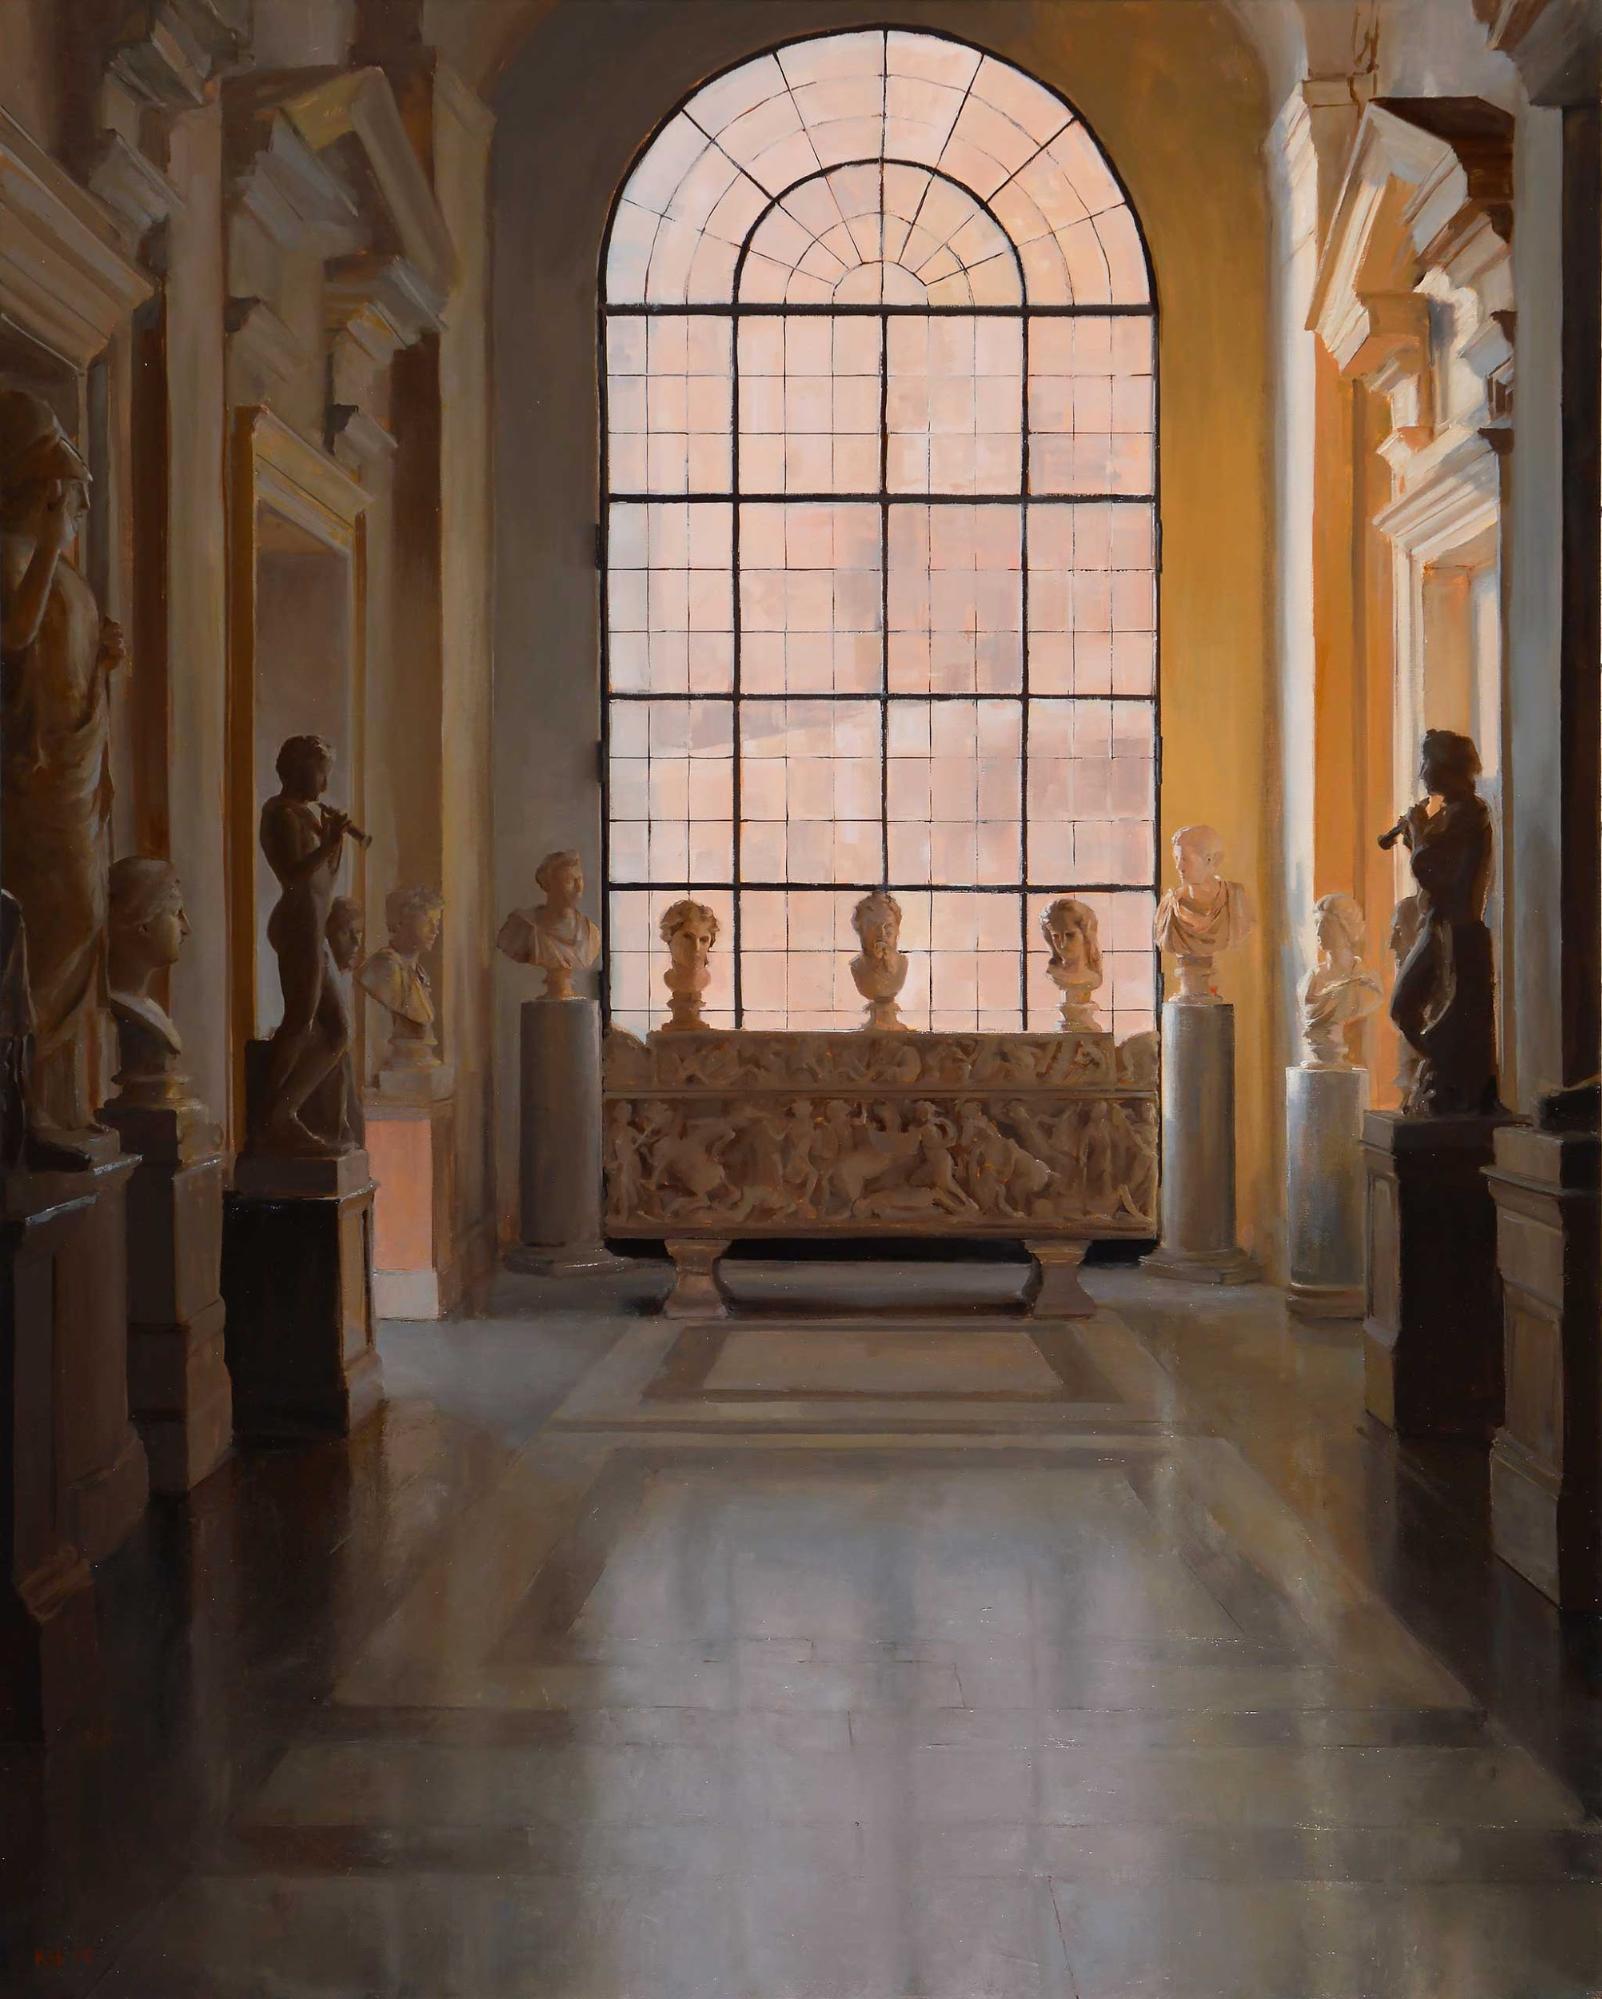 Kenny Harris, “Capitoline Museum,” oil on canvas, 60 x 48 in.